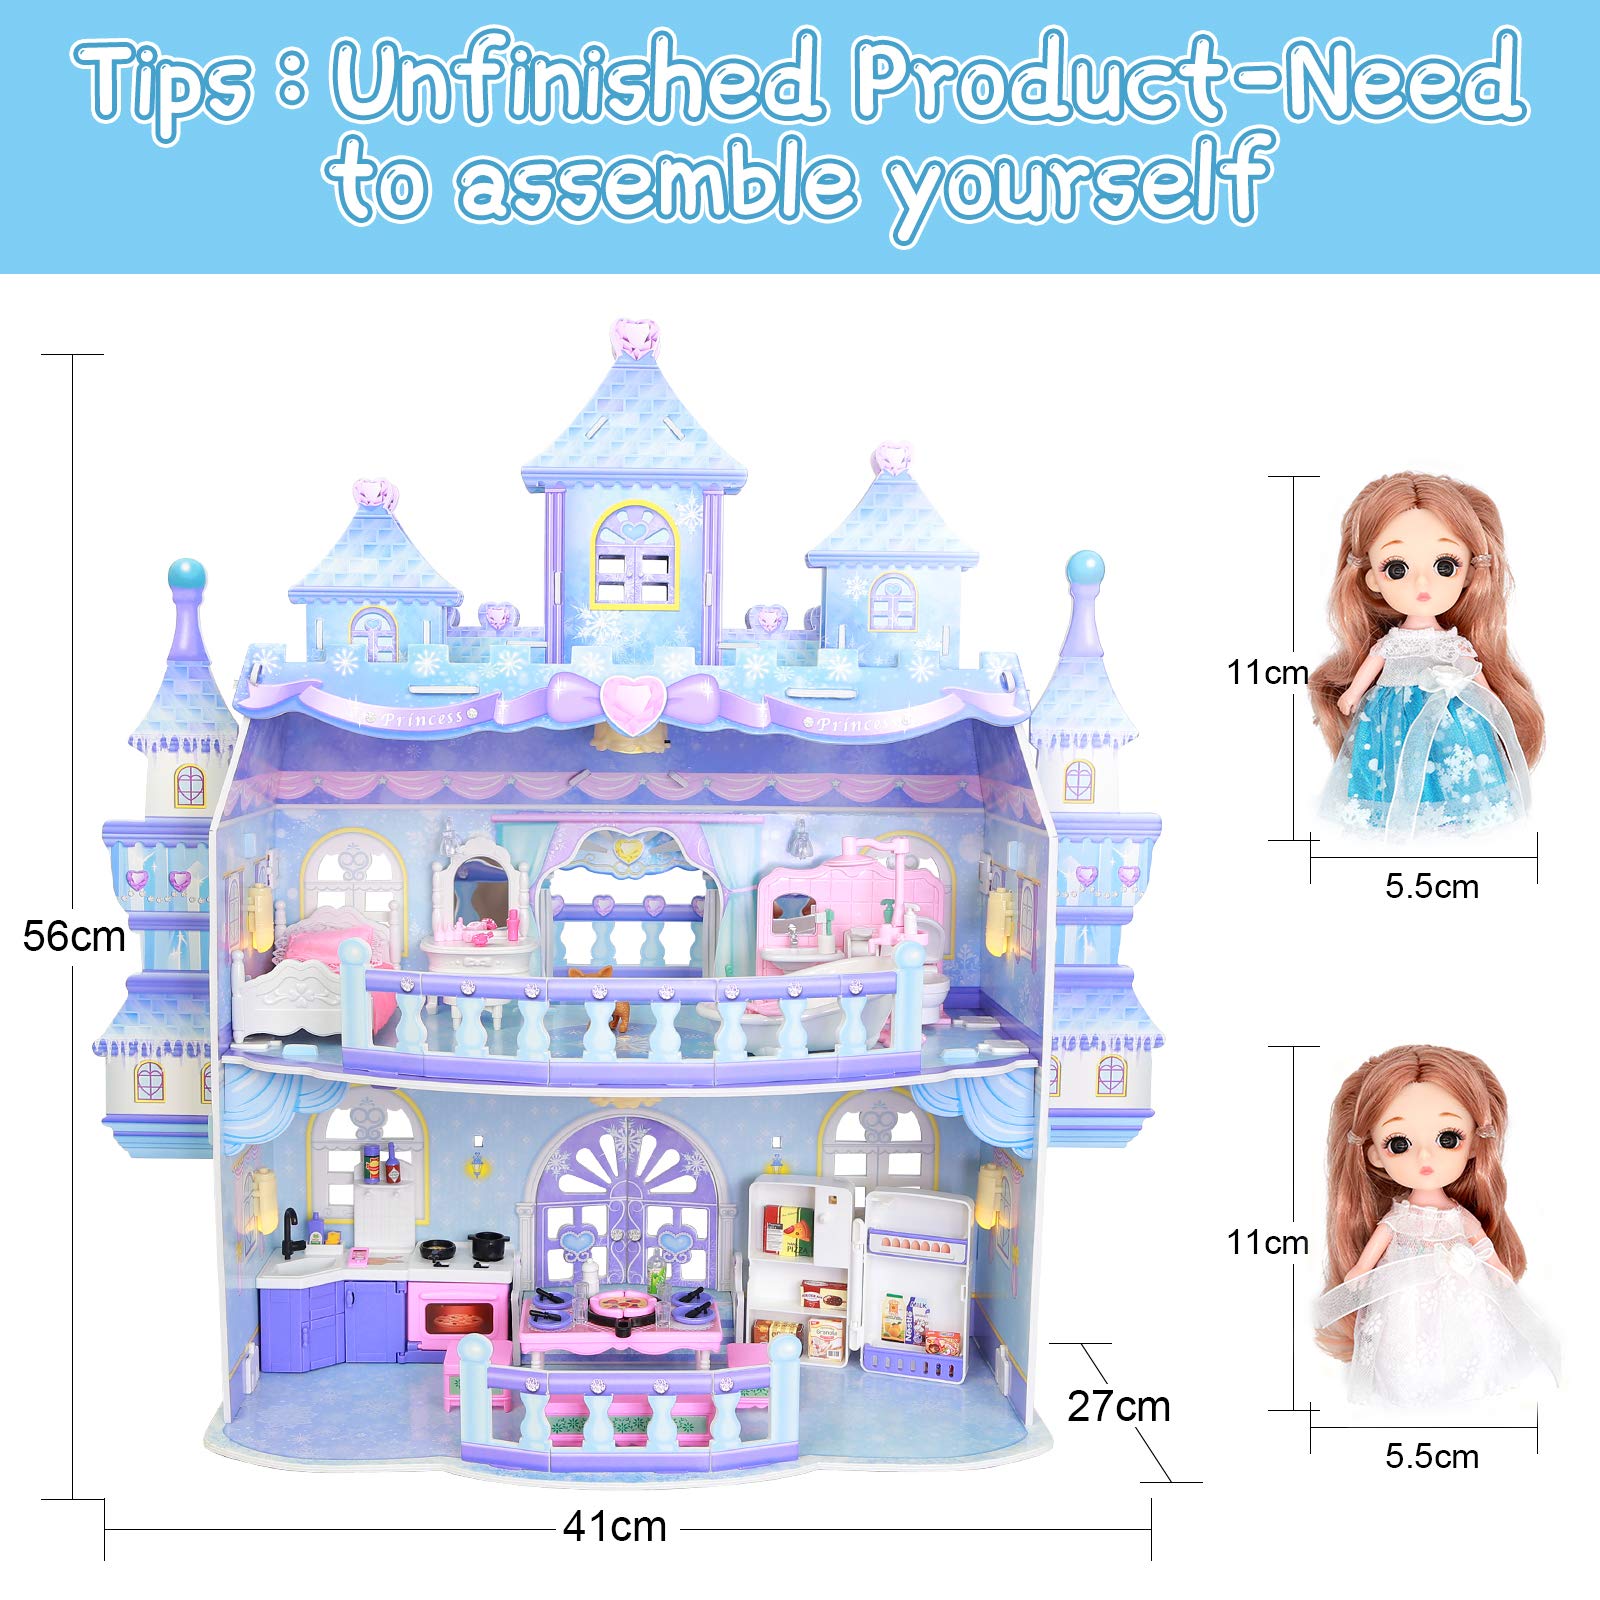 Dollhouse, 3D Princess Castle Two-Story Playset Doll House with Lights for Girls, DIY Building Pretend Dream House Playhouse Toys with Furniture and Accessories, Living Room Bedroom Kitchen Bathroom